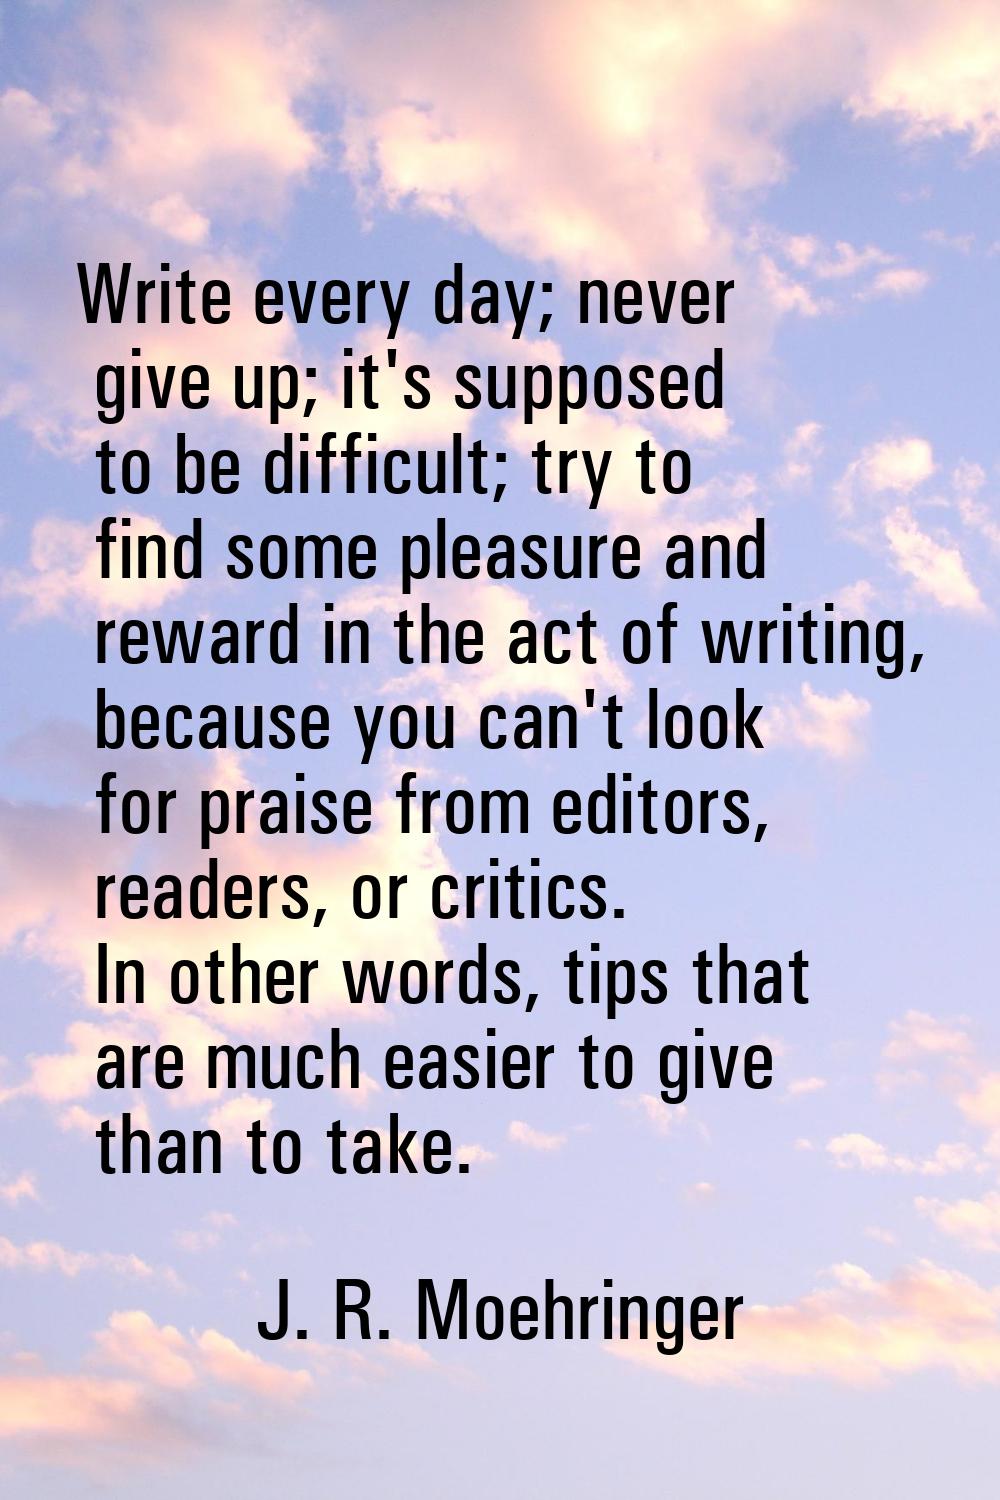 Write every day; never give up; it's supposed to be difficult; try to find some pleasure and reward